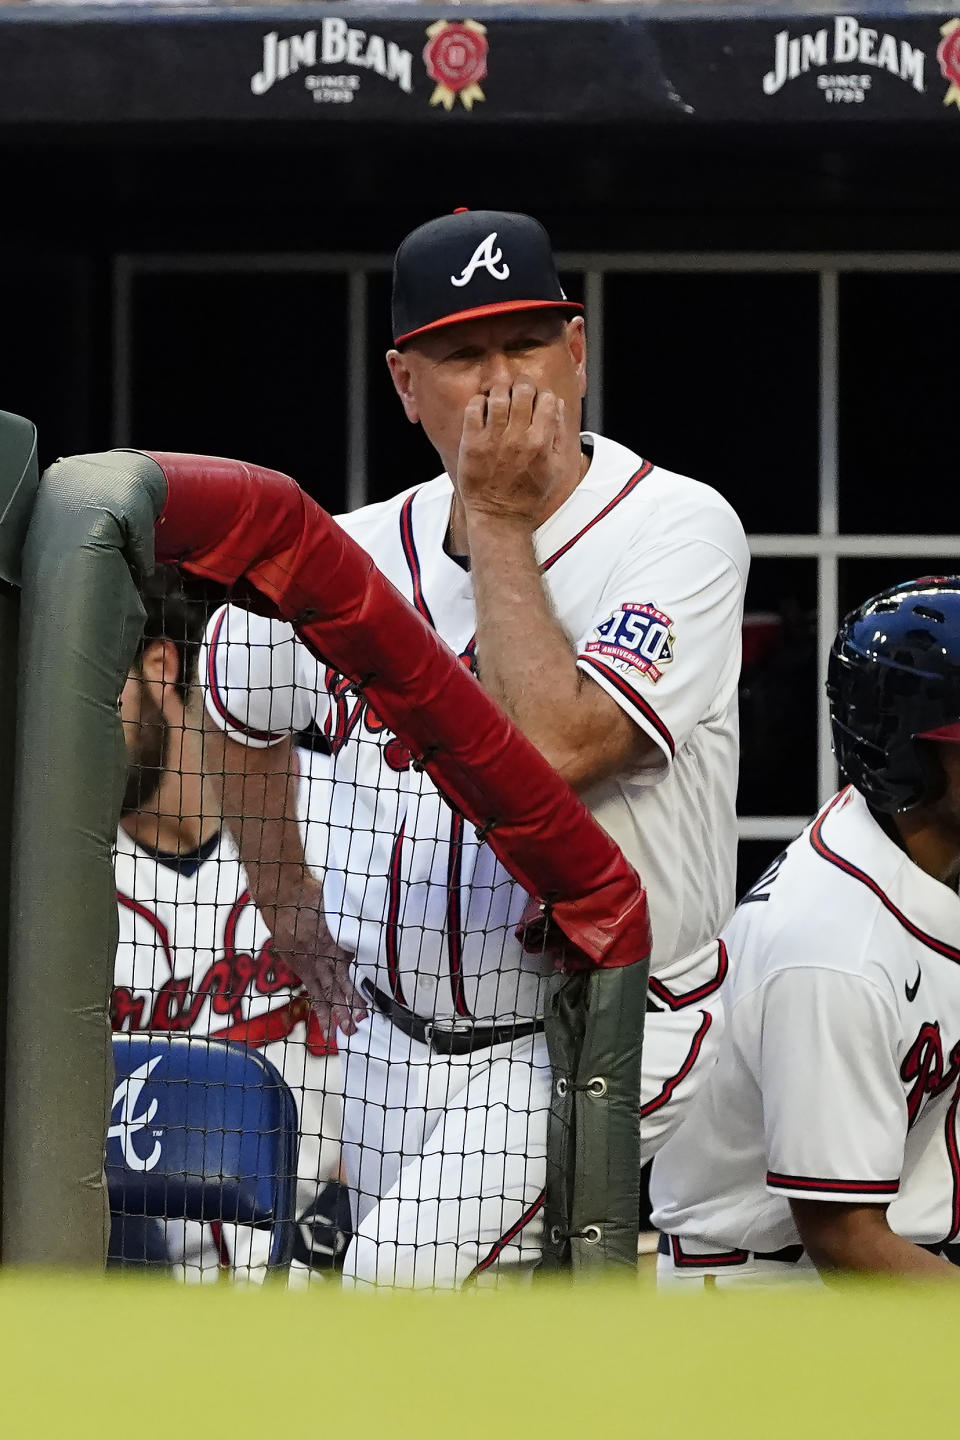 Atlanta Braves manager Brian Snitker watches from the dugout during a baseball game against the Tampa Bay Rays, Saturday, July 17, 2021, in Atlanta. (AP Photo/John Bazemore)